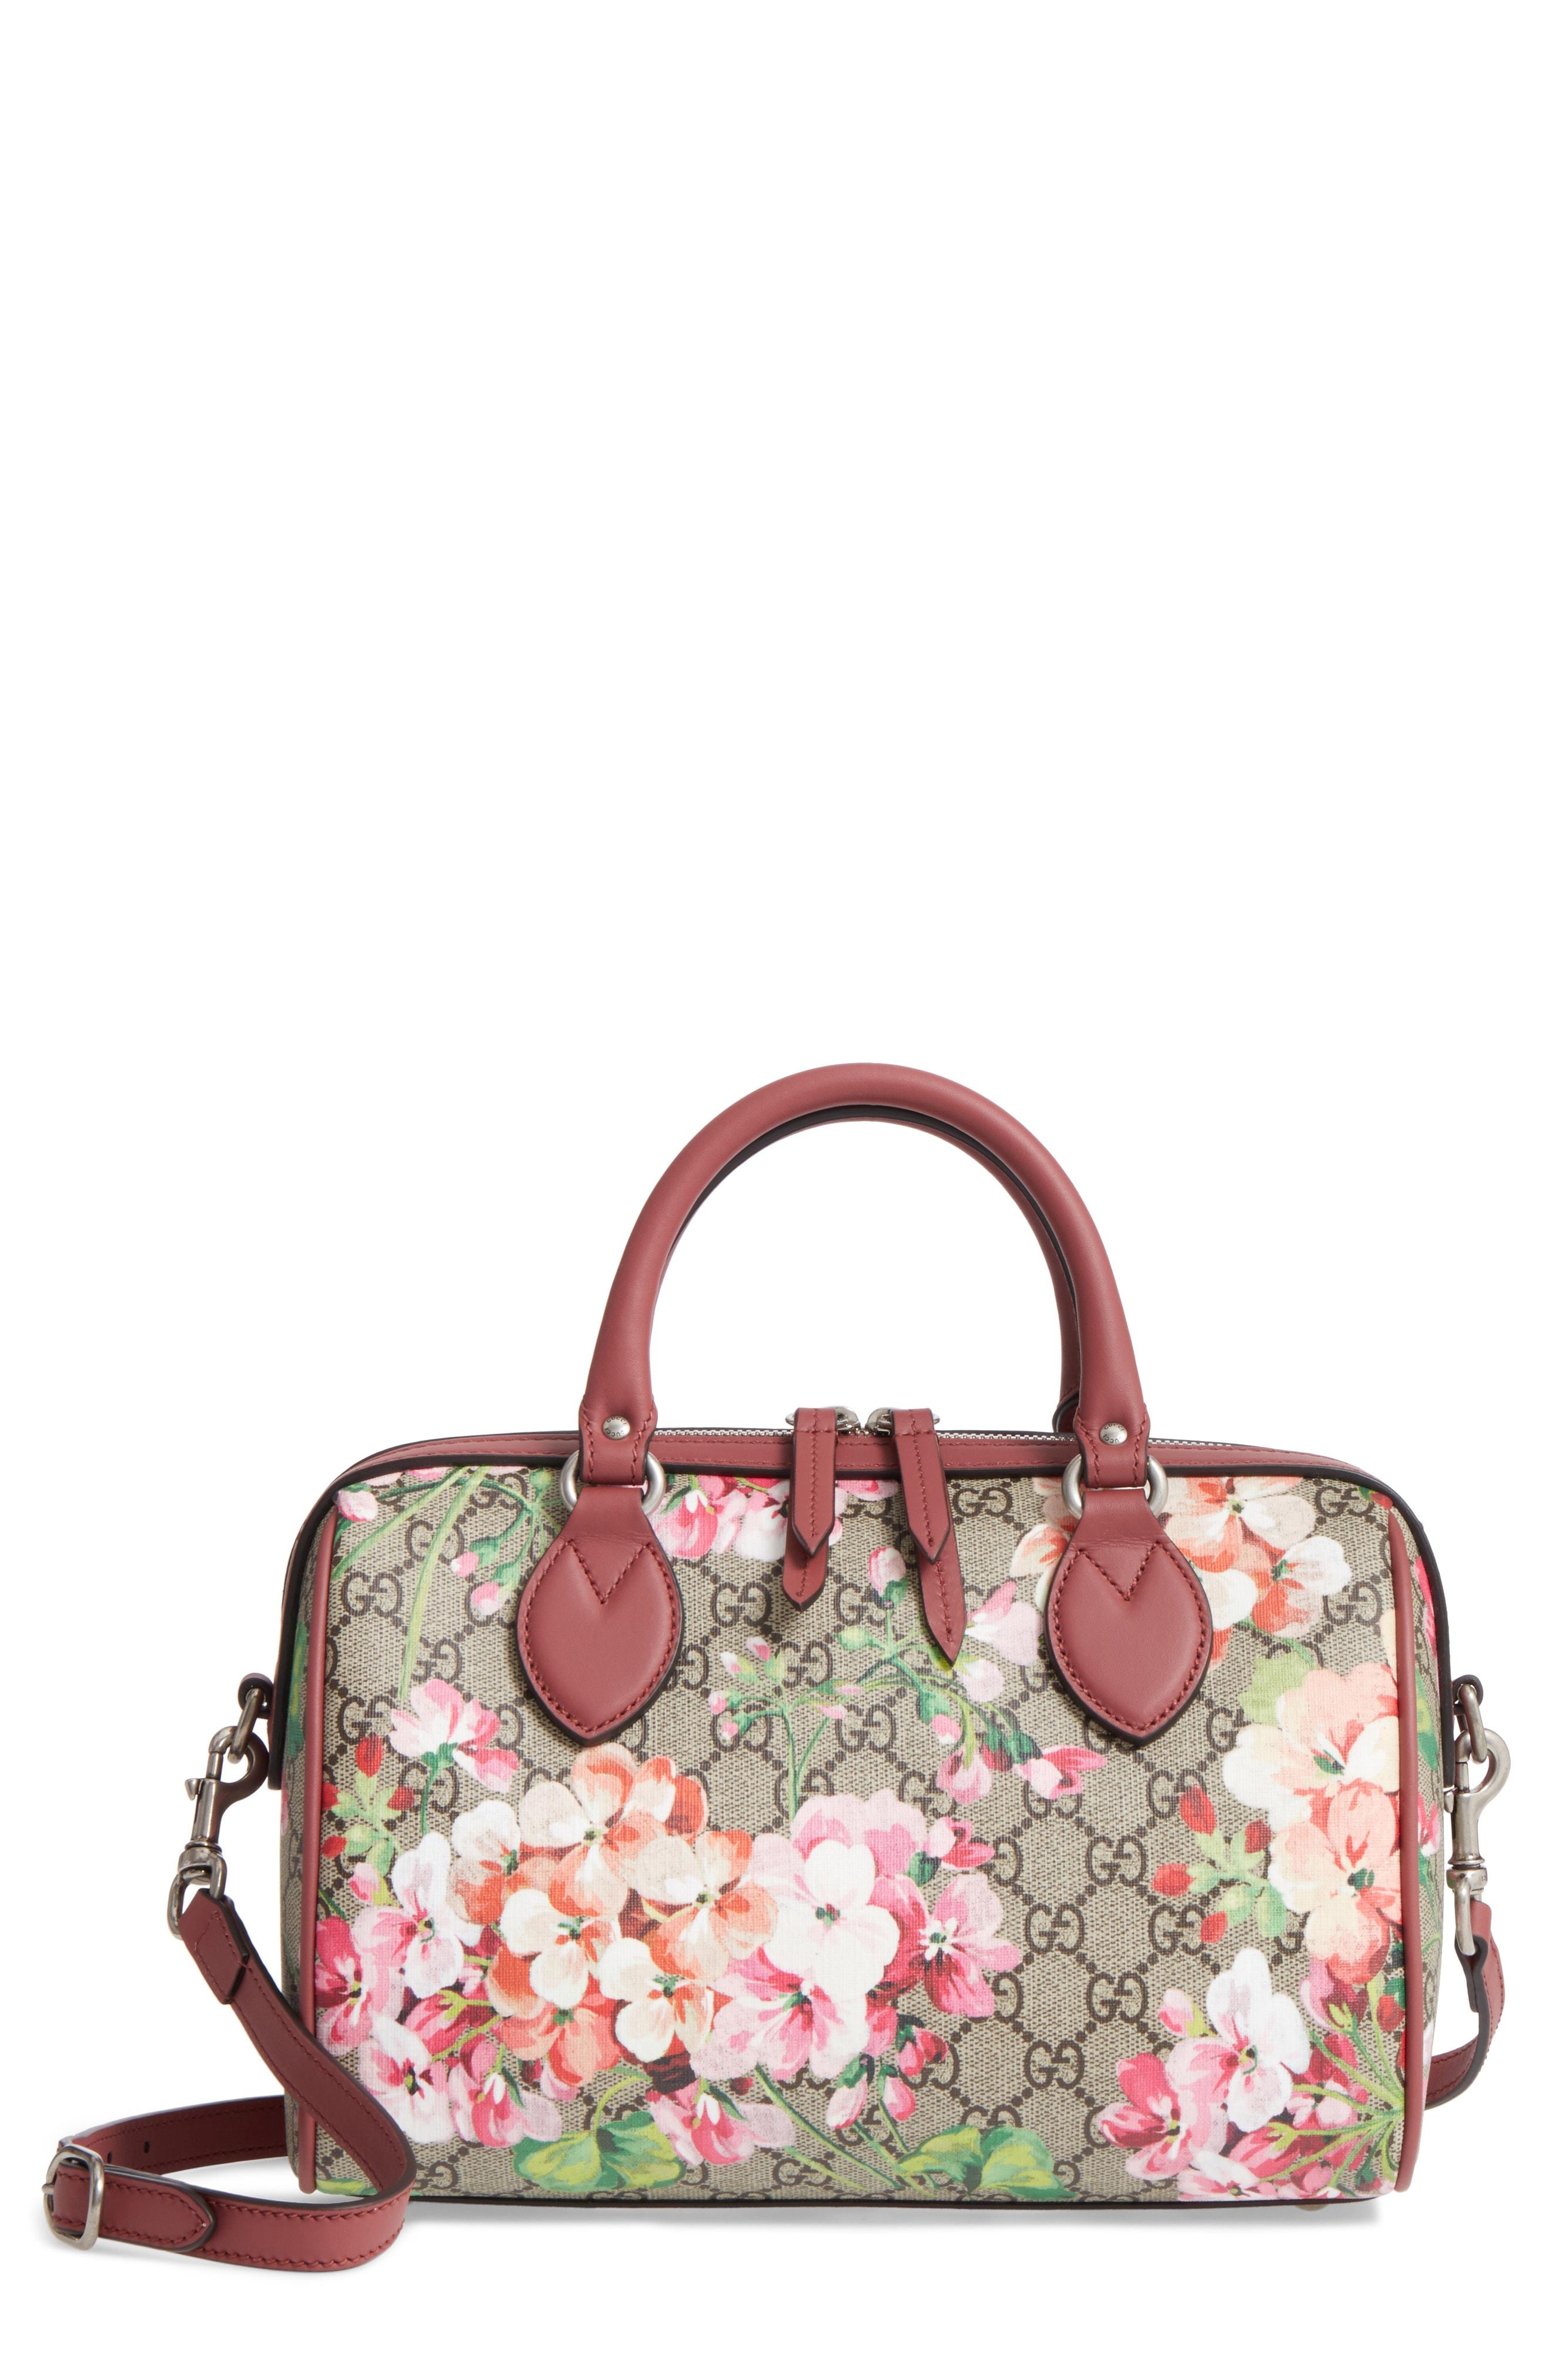 Gucci Small Blooms Top Handle Gg Supreme Canvas Bag - Lyst